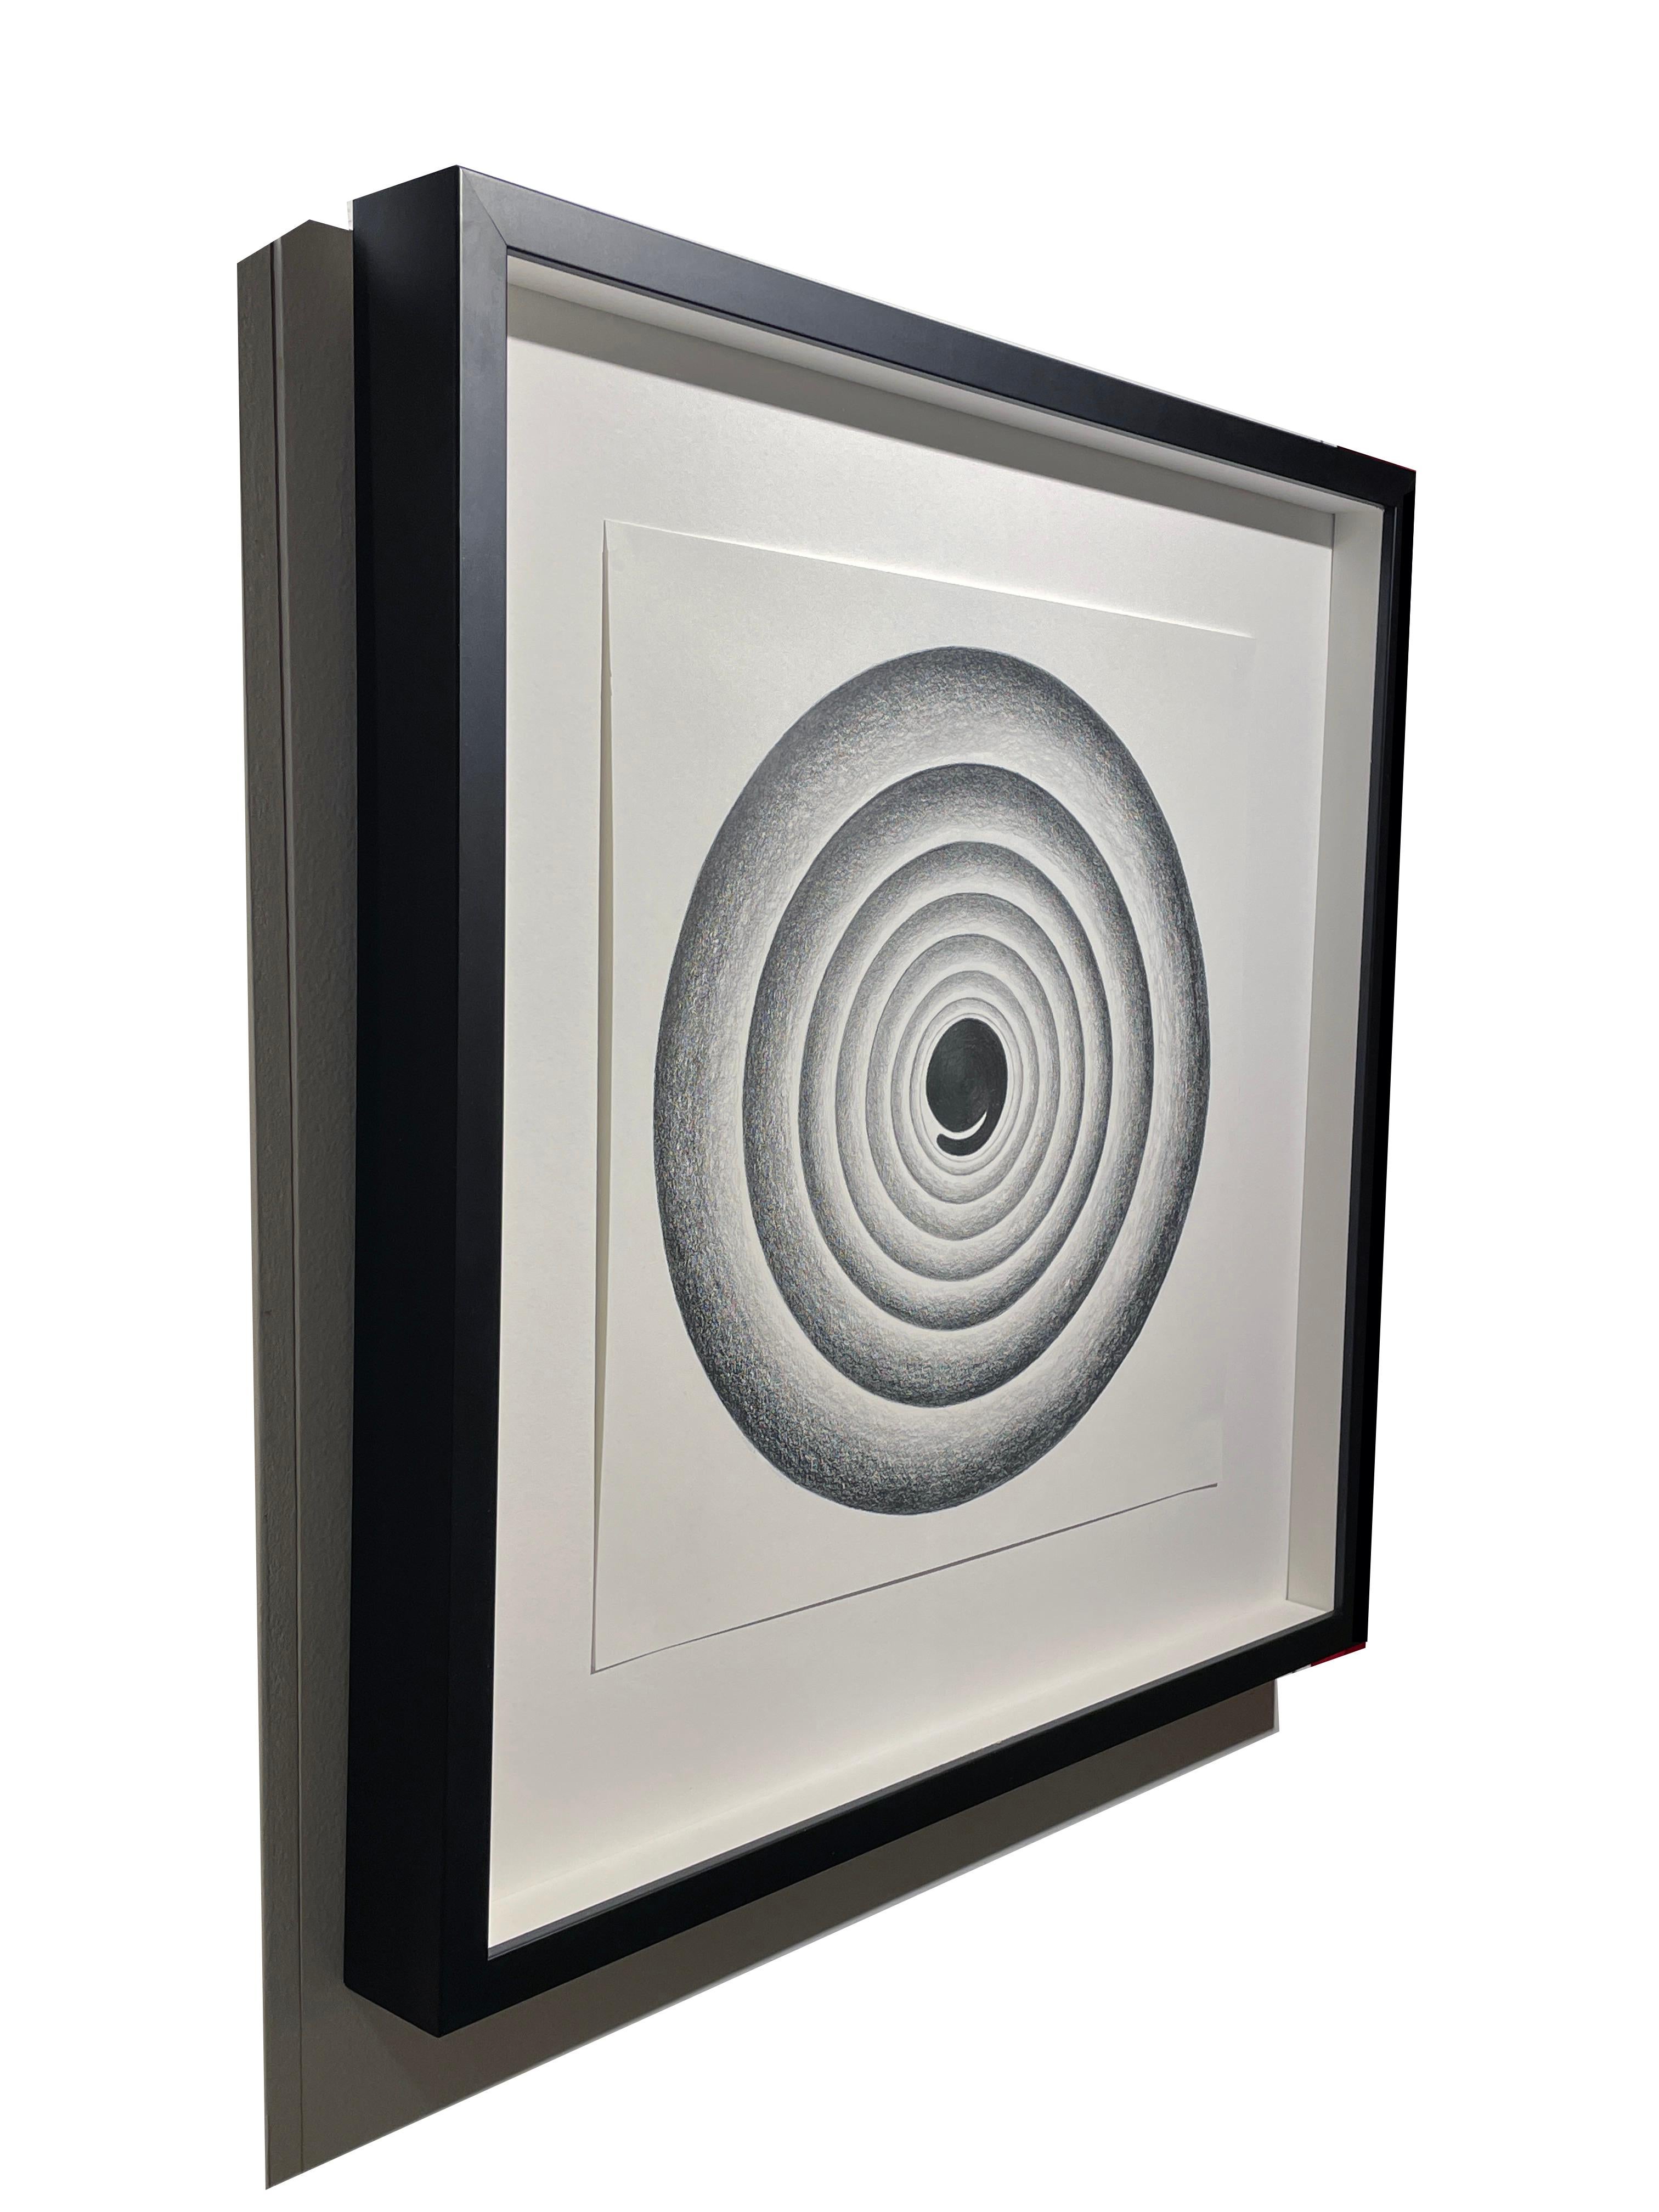 Set of Three Geometric Circular Abstractions , Graphite on Paper, Framed 7